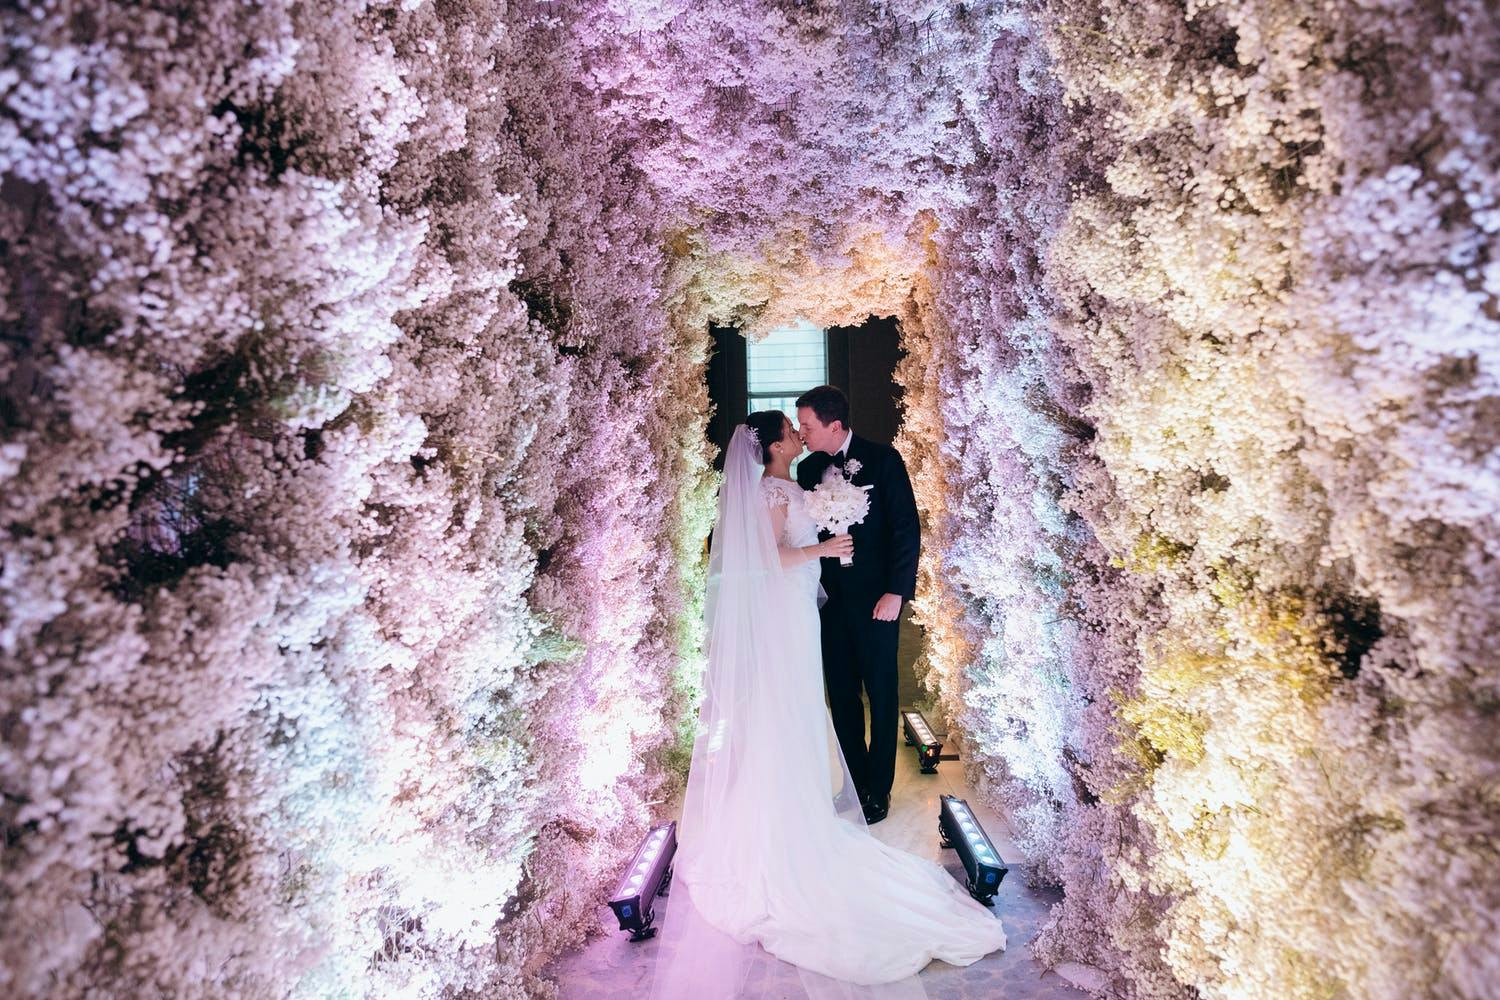 Bride and Groom Kiss in Wedding Entrance Made of Pure Baby's Breath | PartySlate